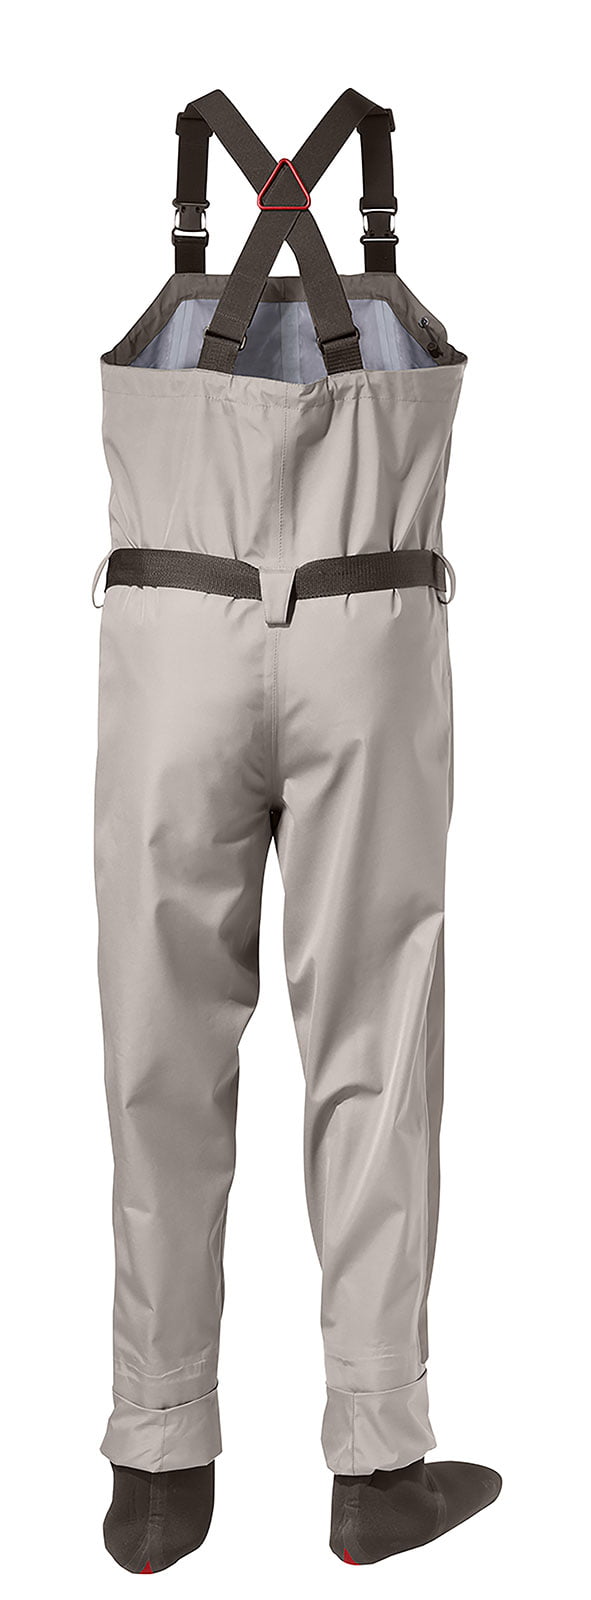 SIZE MEDIUM LONG WOMEN'S REDINGTON WILLOW RIVER BREATHABLE FISHING CHEST WADERS 